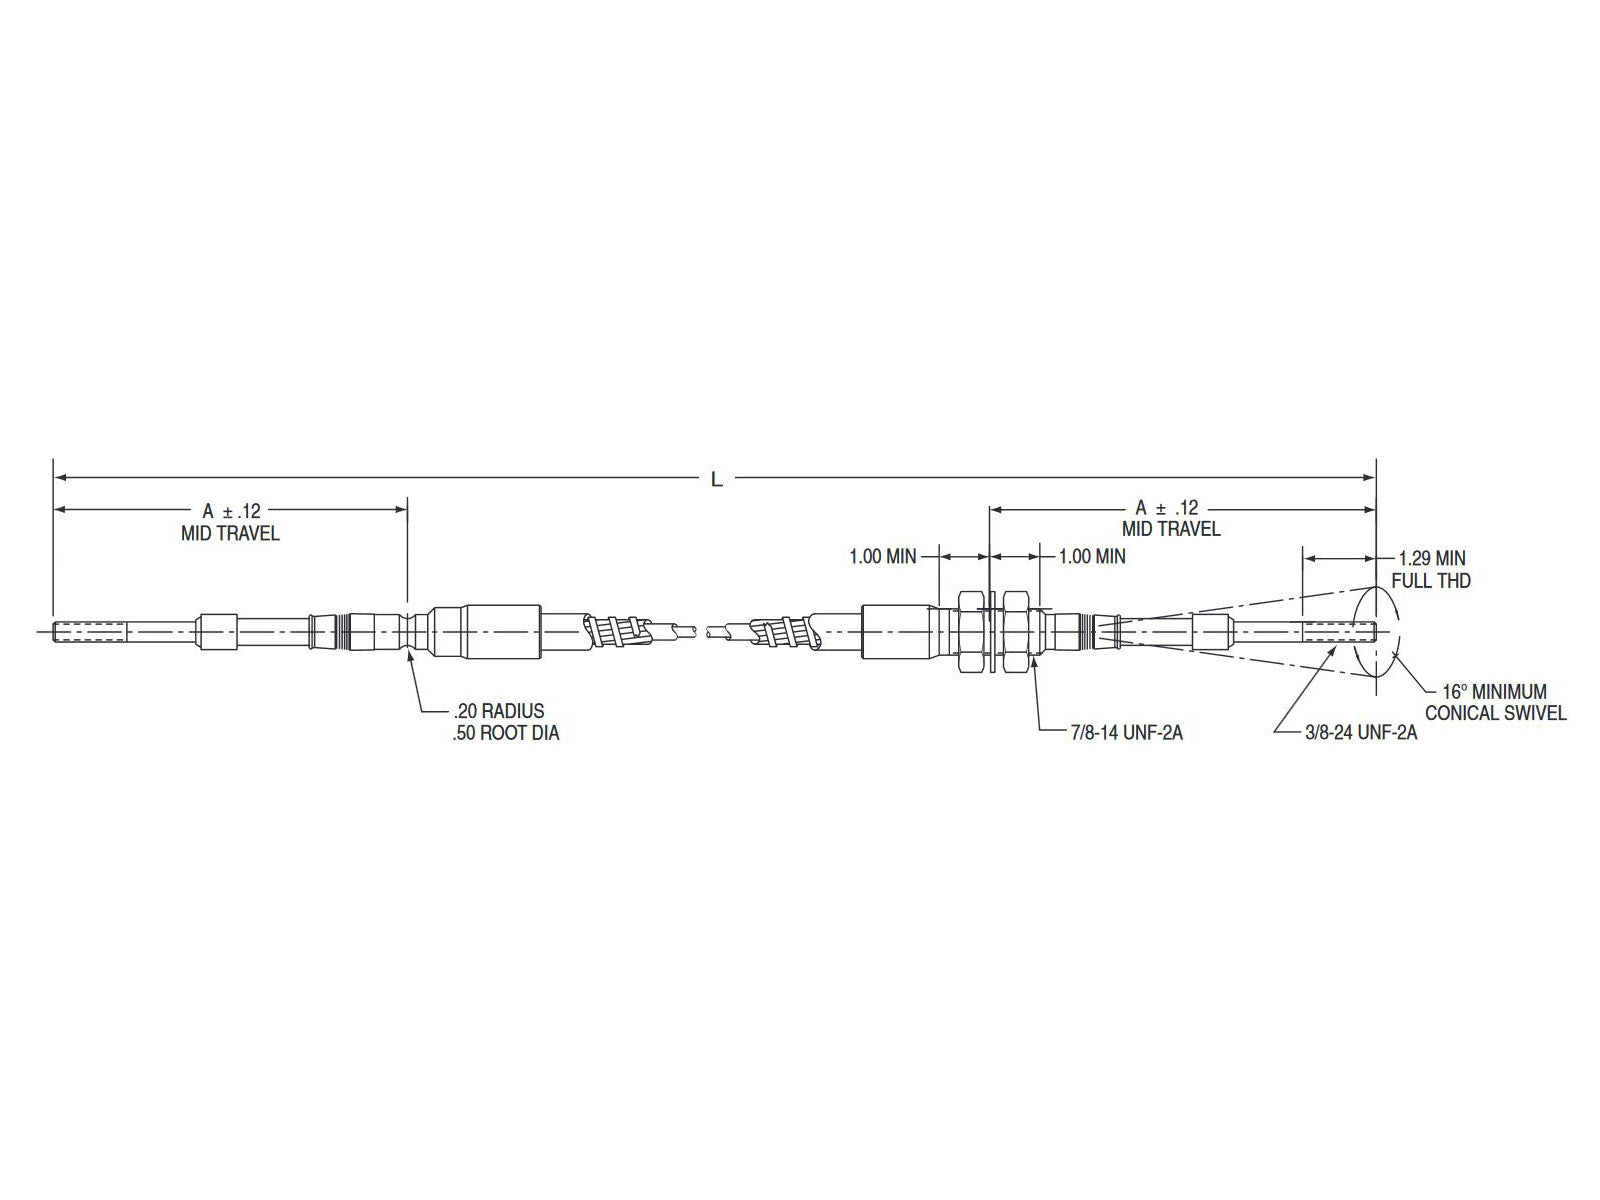 Push Pull Threaded/Grooved Utility Cable Diagram